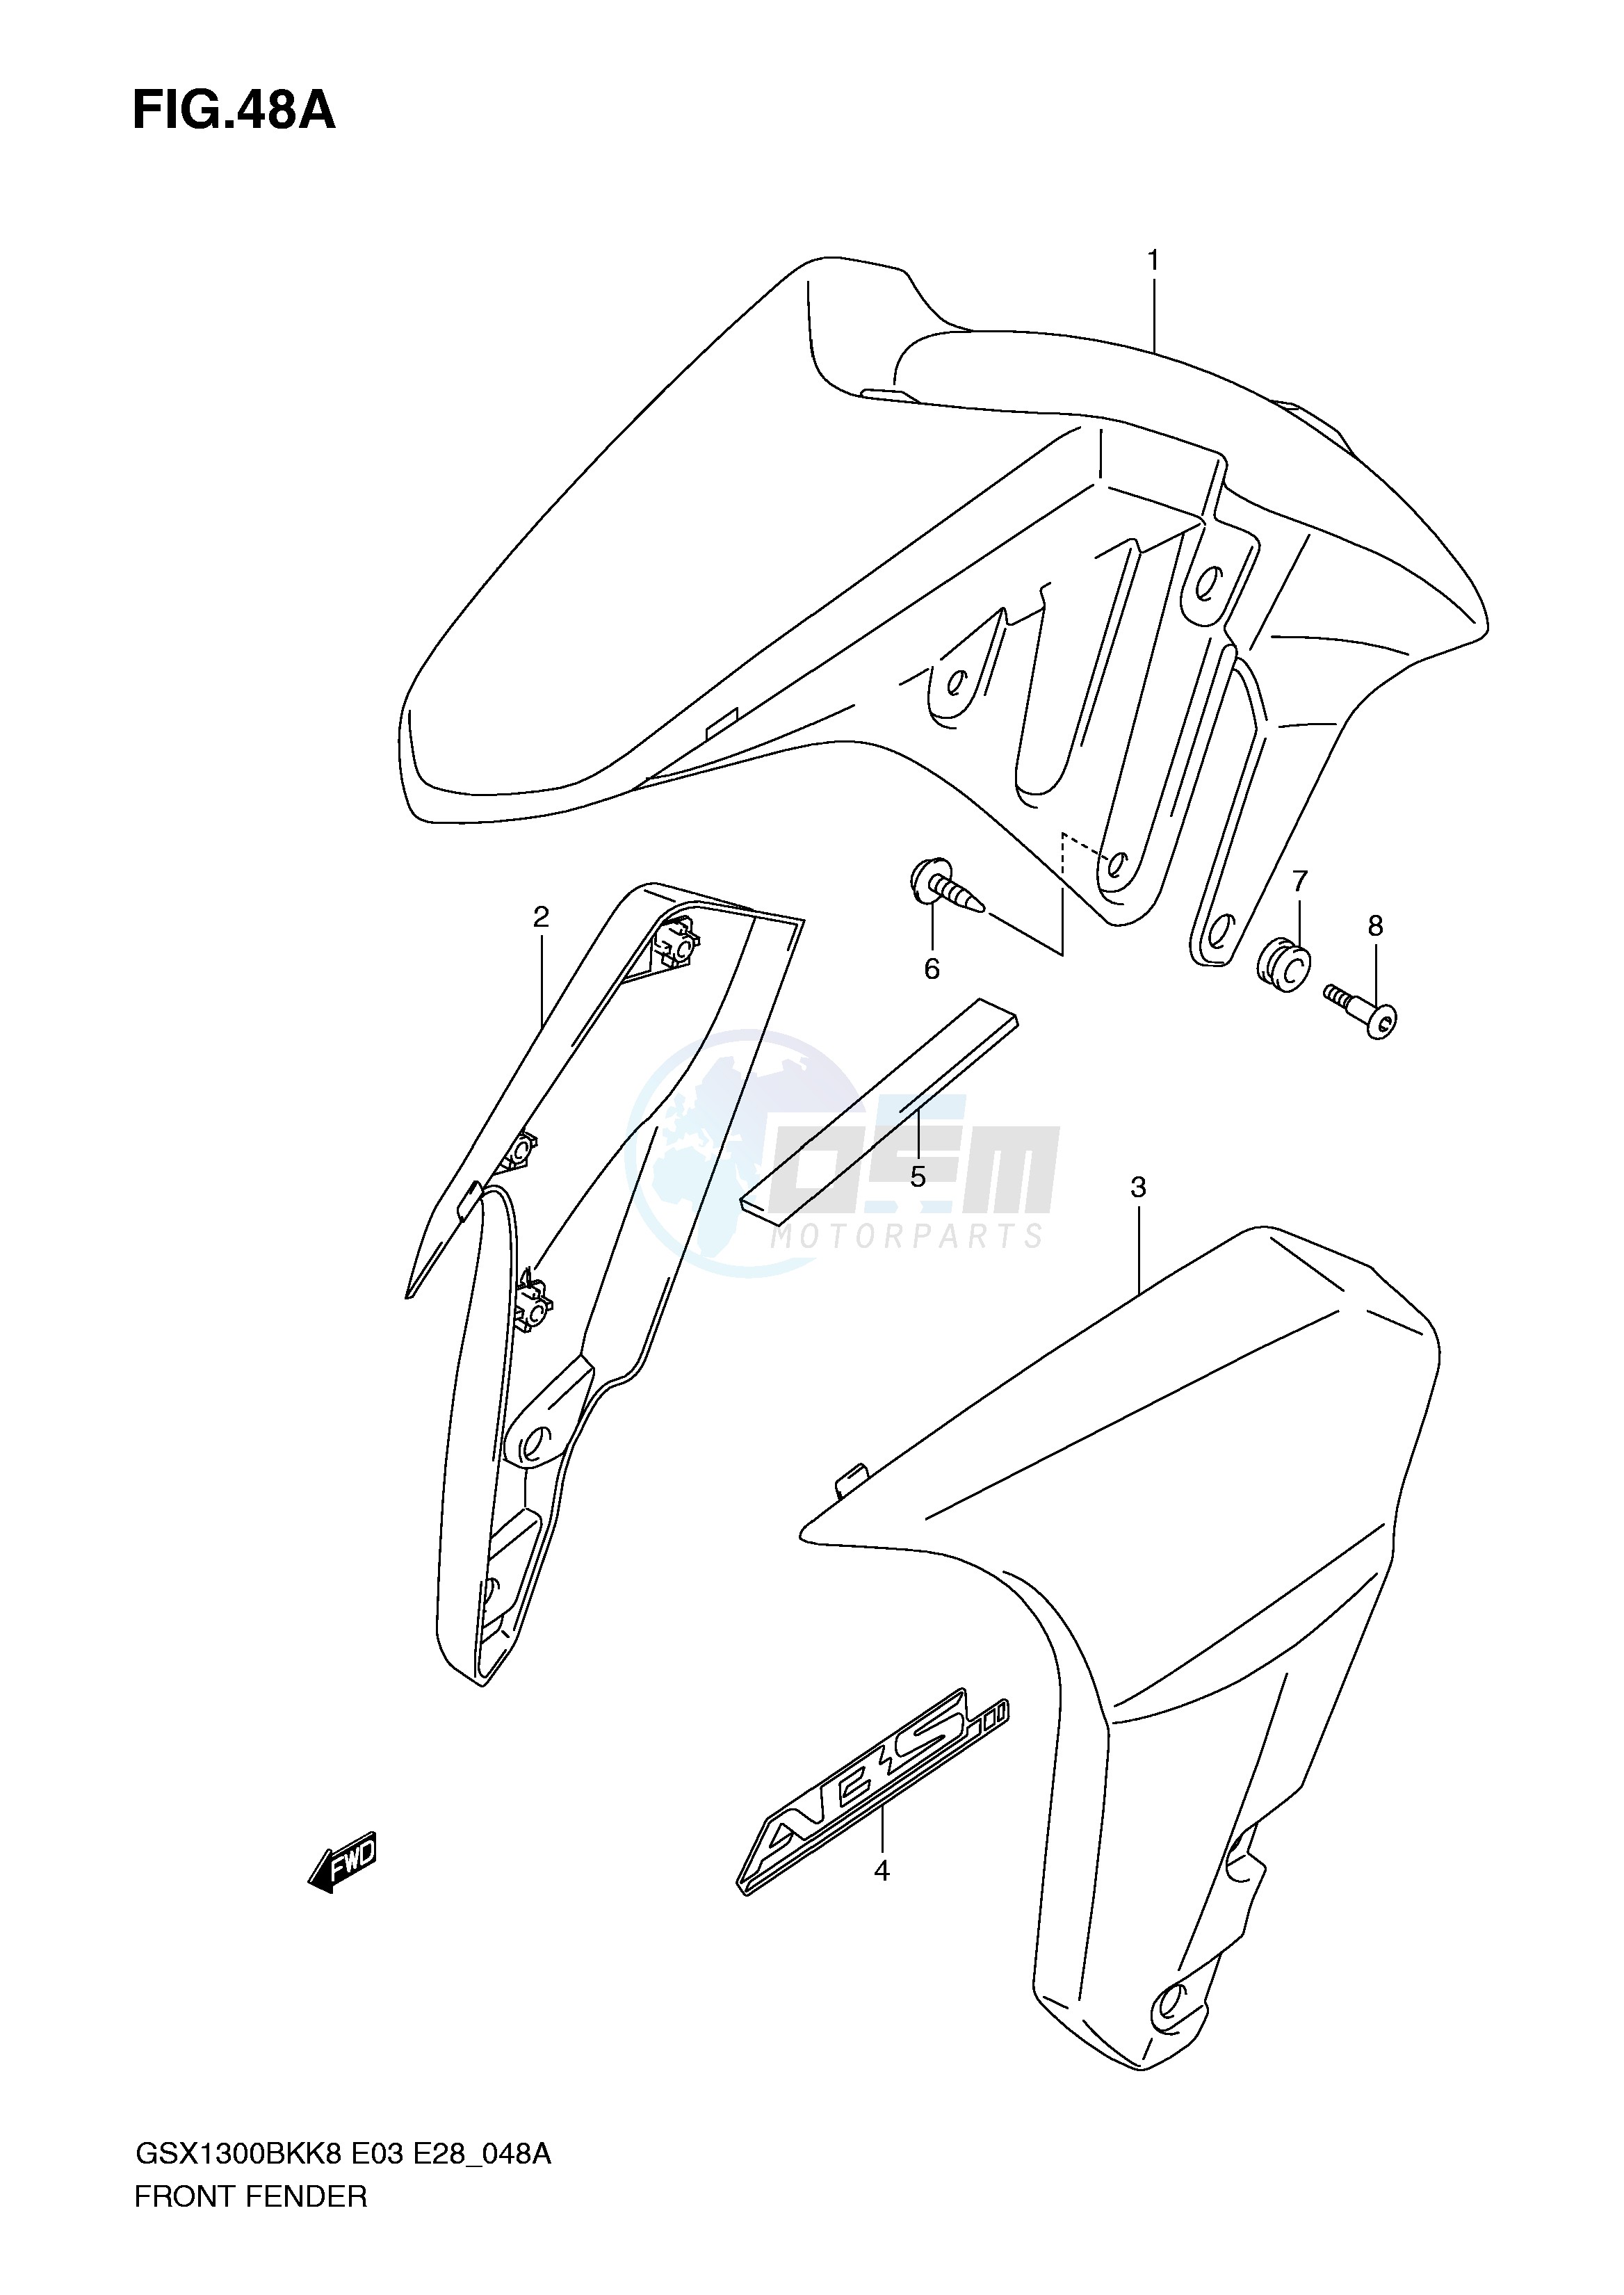 FRONT FENDER (WITH ABS) blueprint